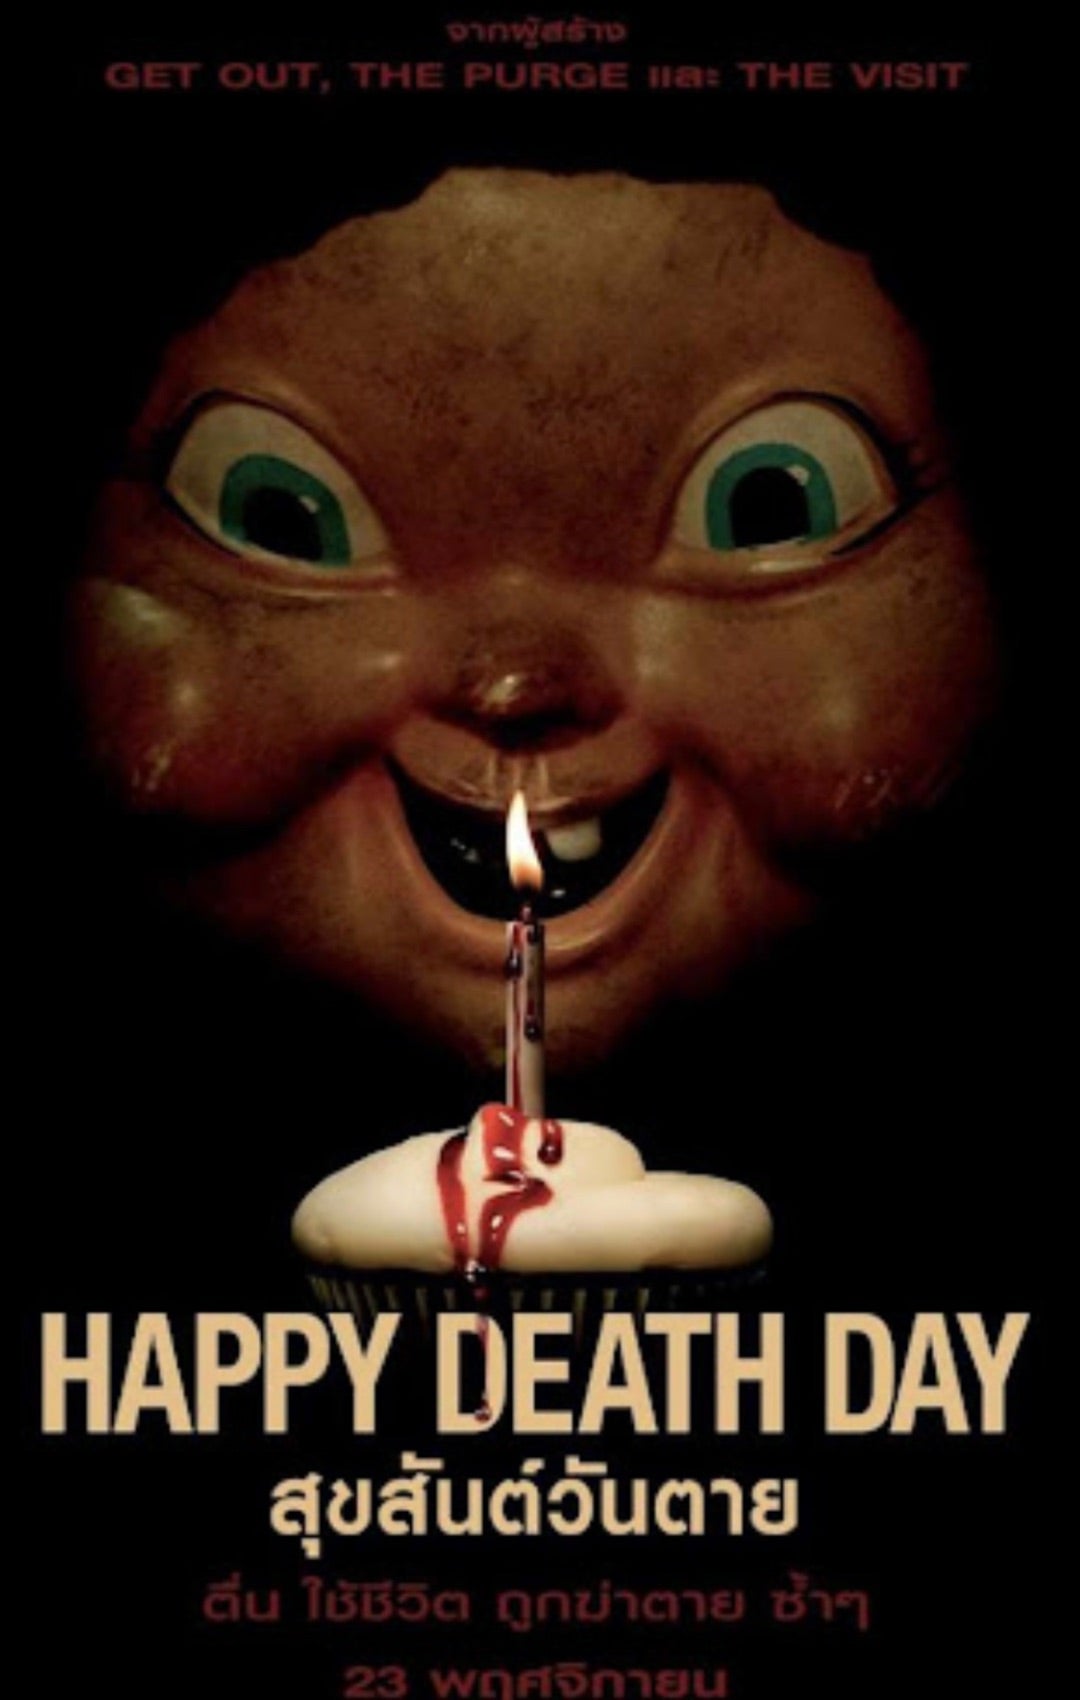 Happy Death Day (2017) Dual Audio Hindi ORG 1080p 720p 480p BluRay Esubs Free Download